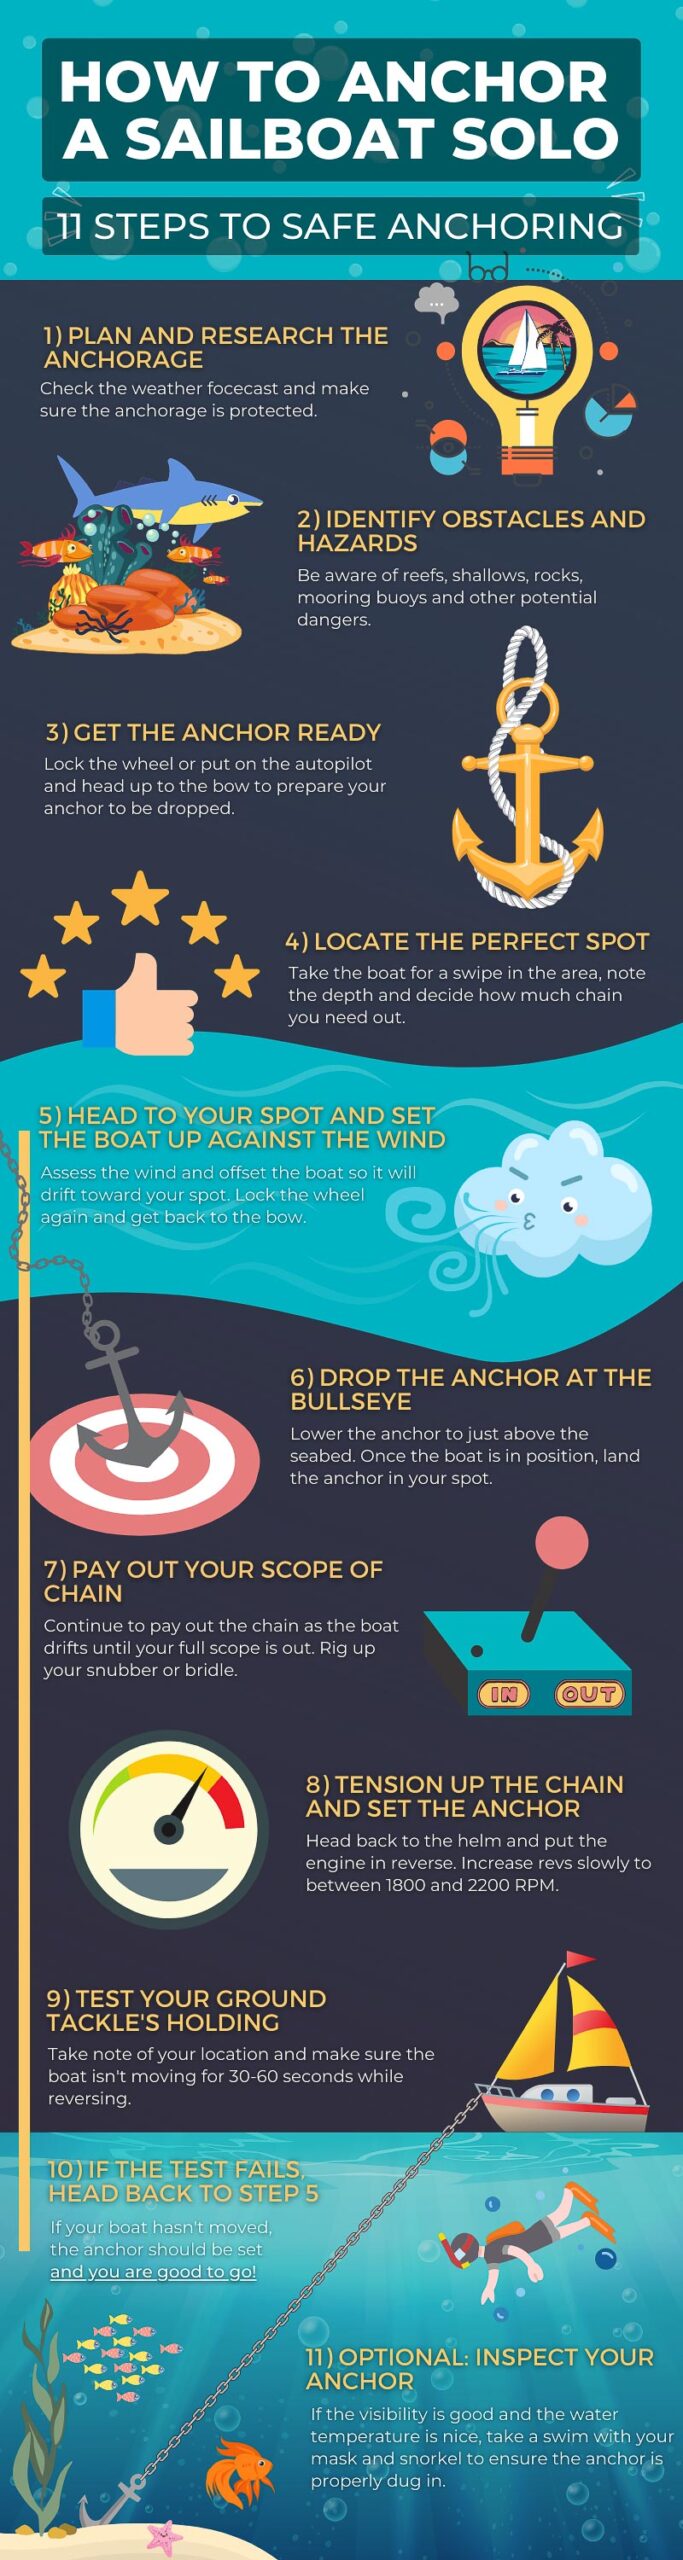 How To Anchor A Sailboat Solo